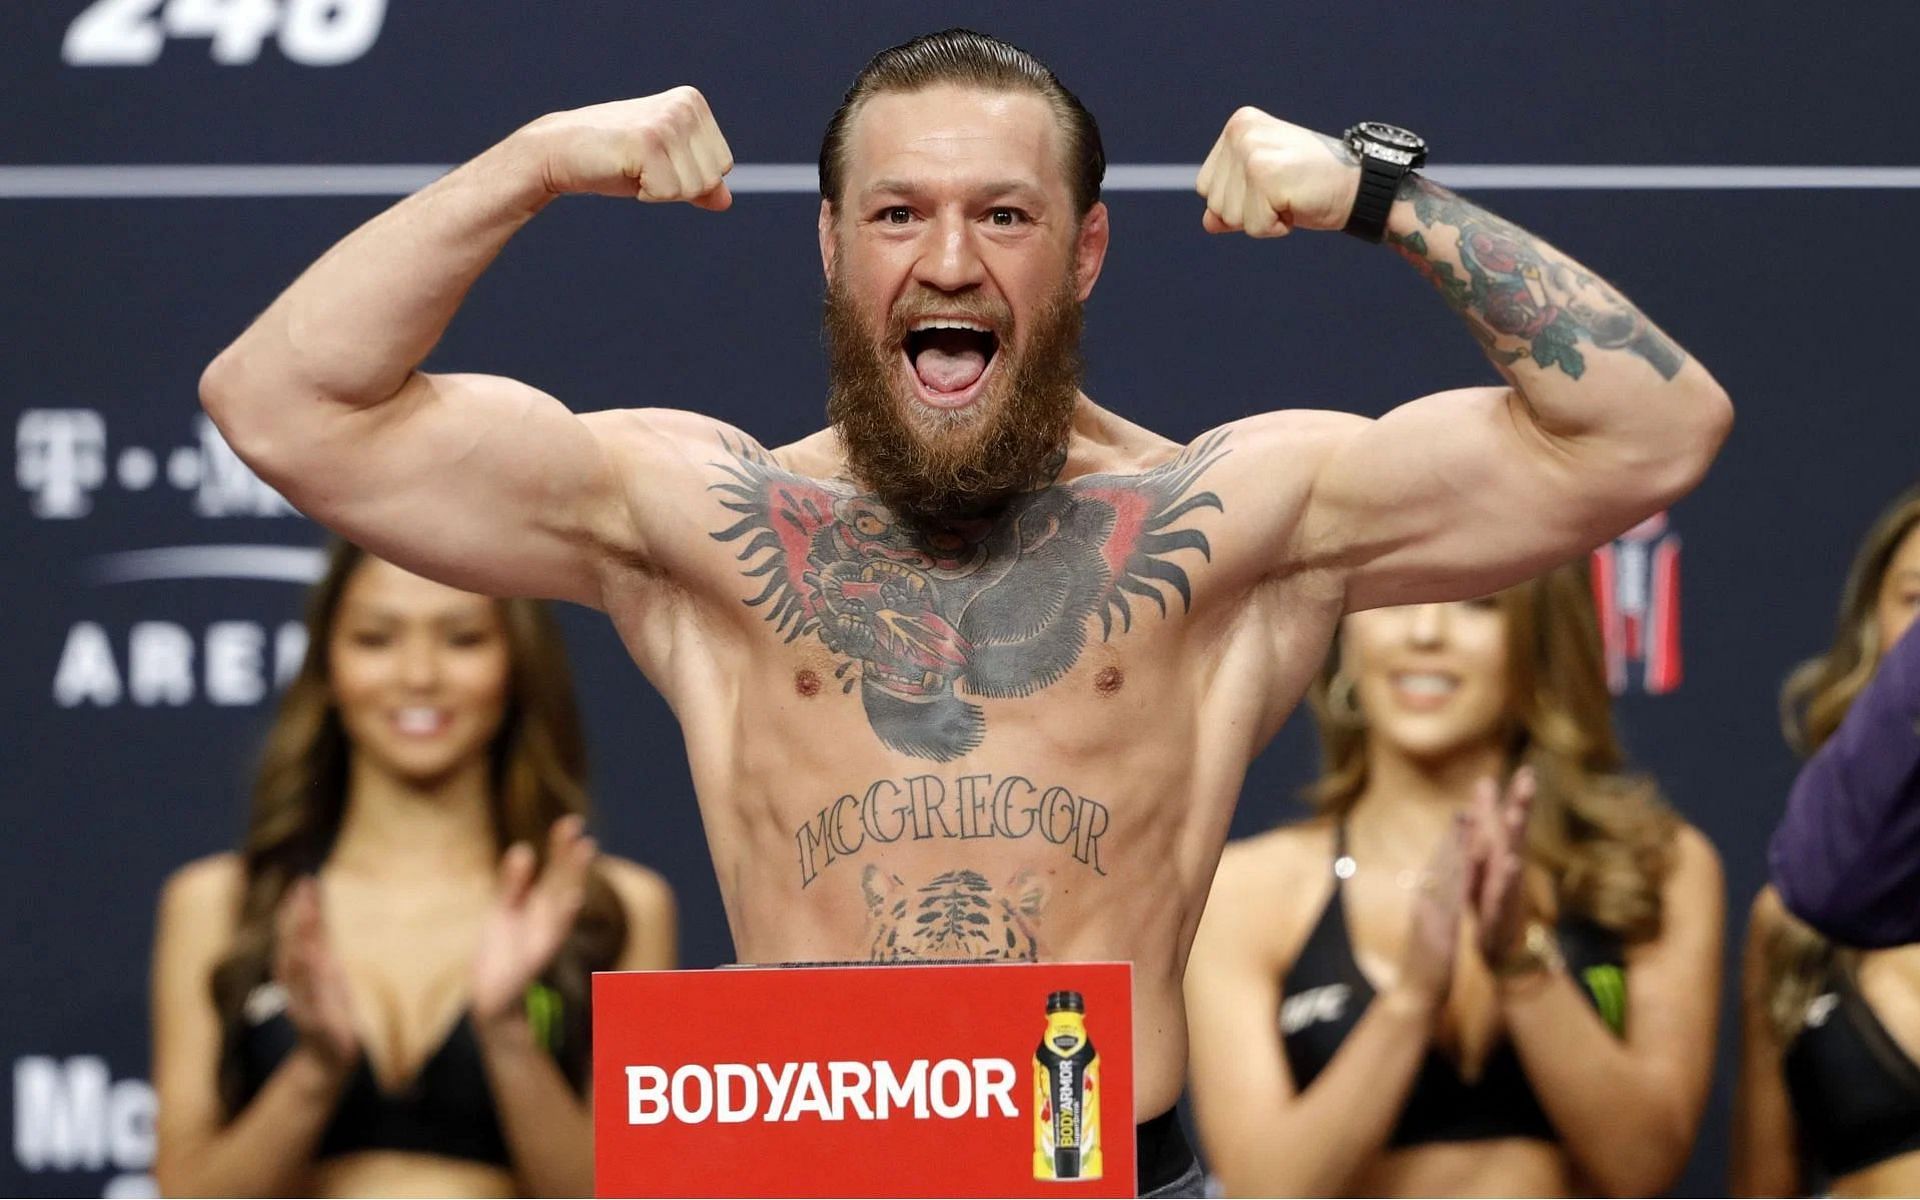 Conor McGregor is currently the UFC